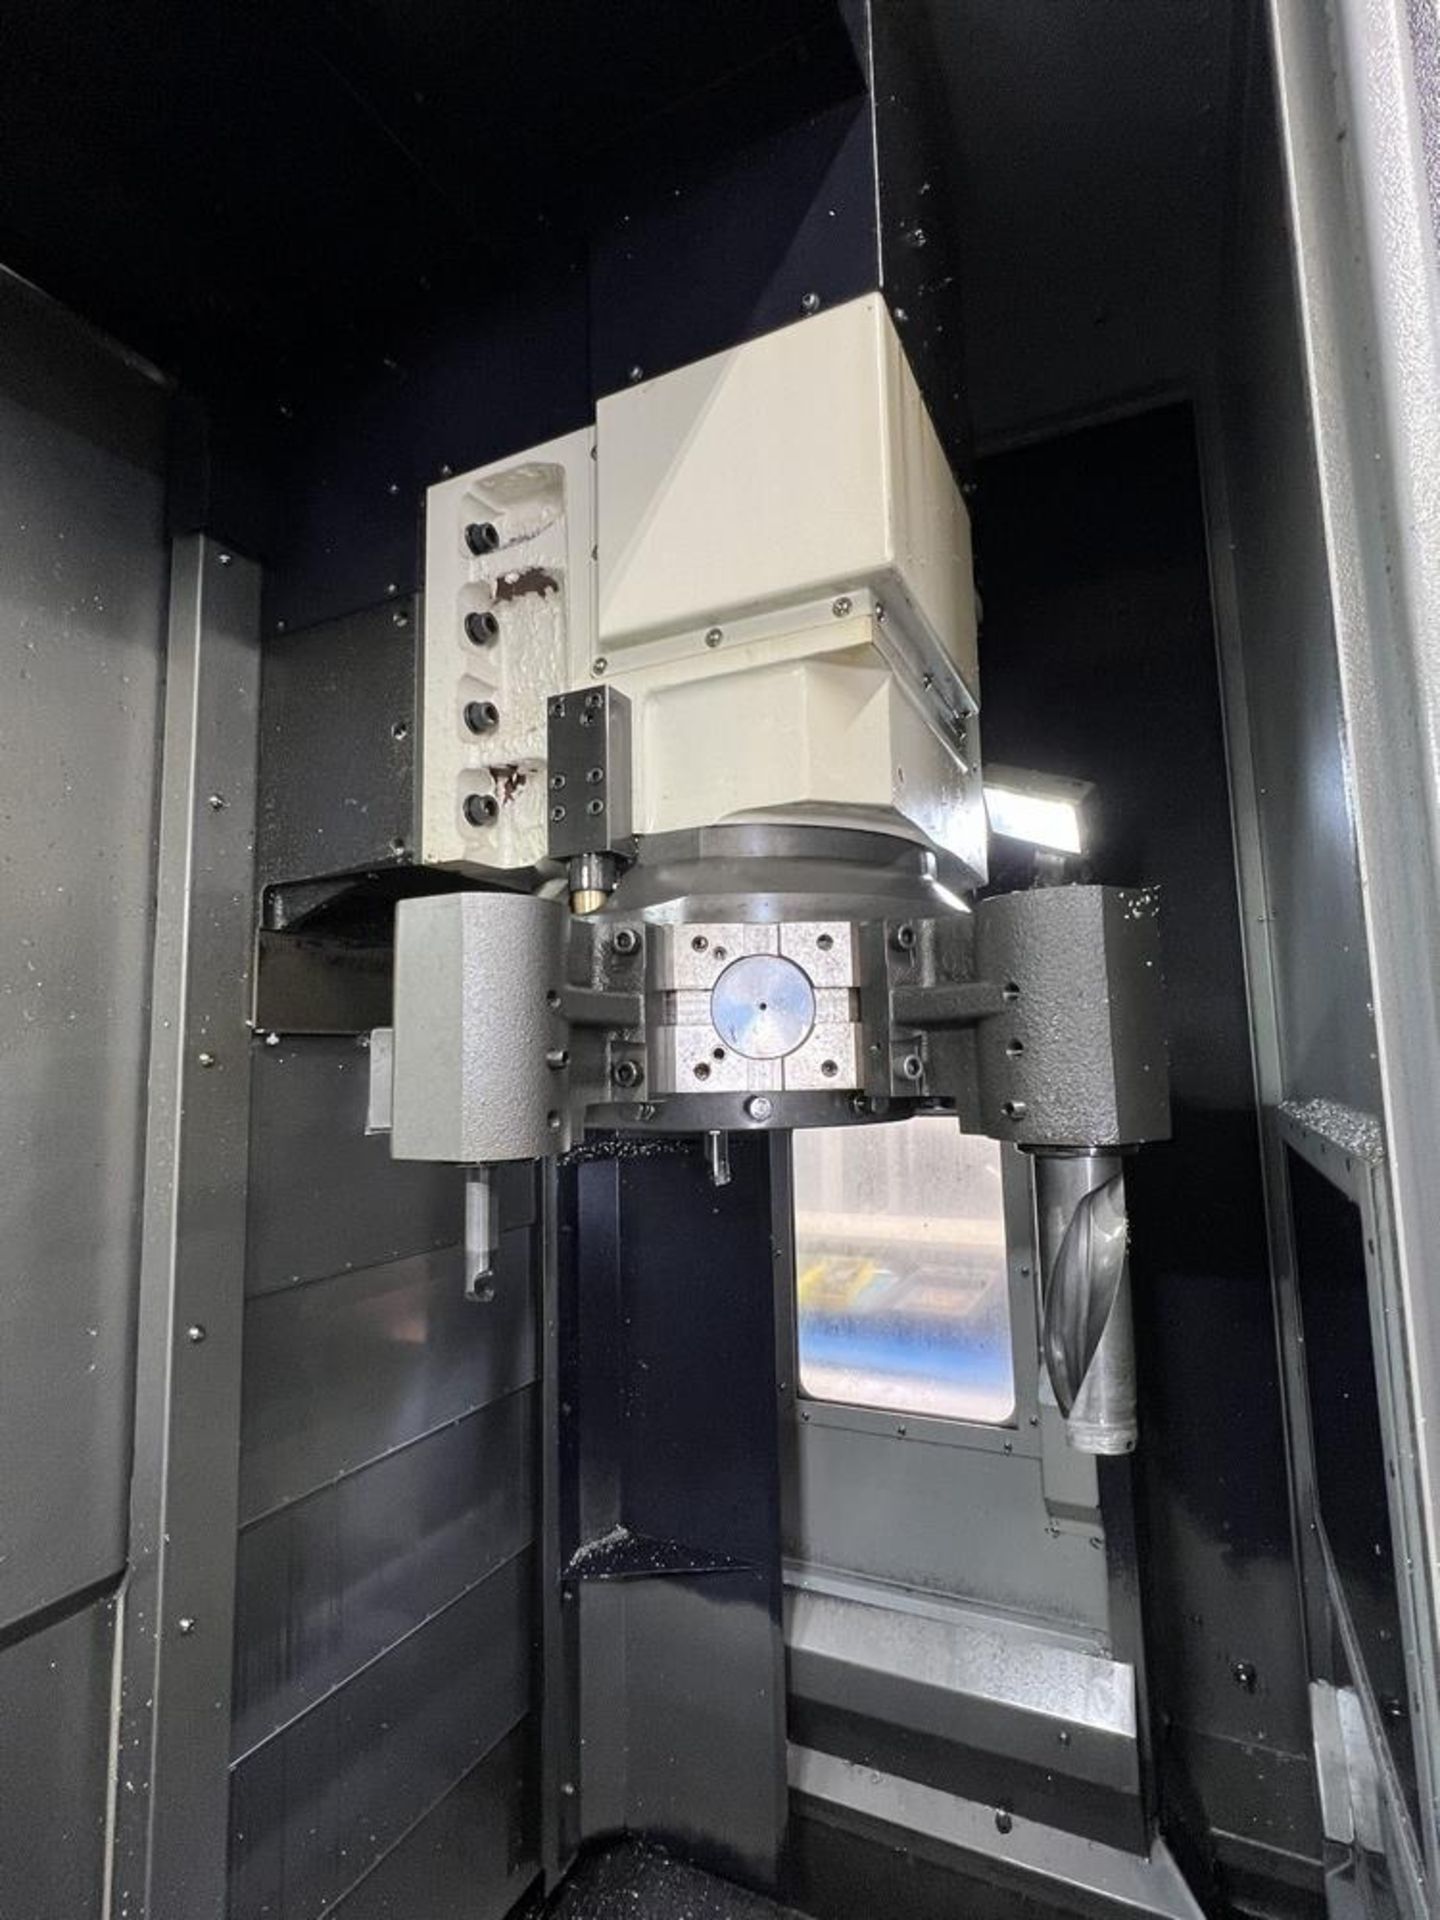 2020 Hwacheon VT-650R MC, 1500 RPM, 24" Chuck, 12 Station Turret, Live Milling, 35" Max Swing, - Image 29 of 32